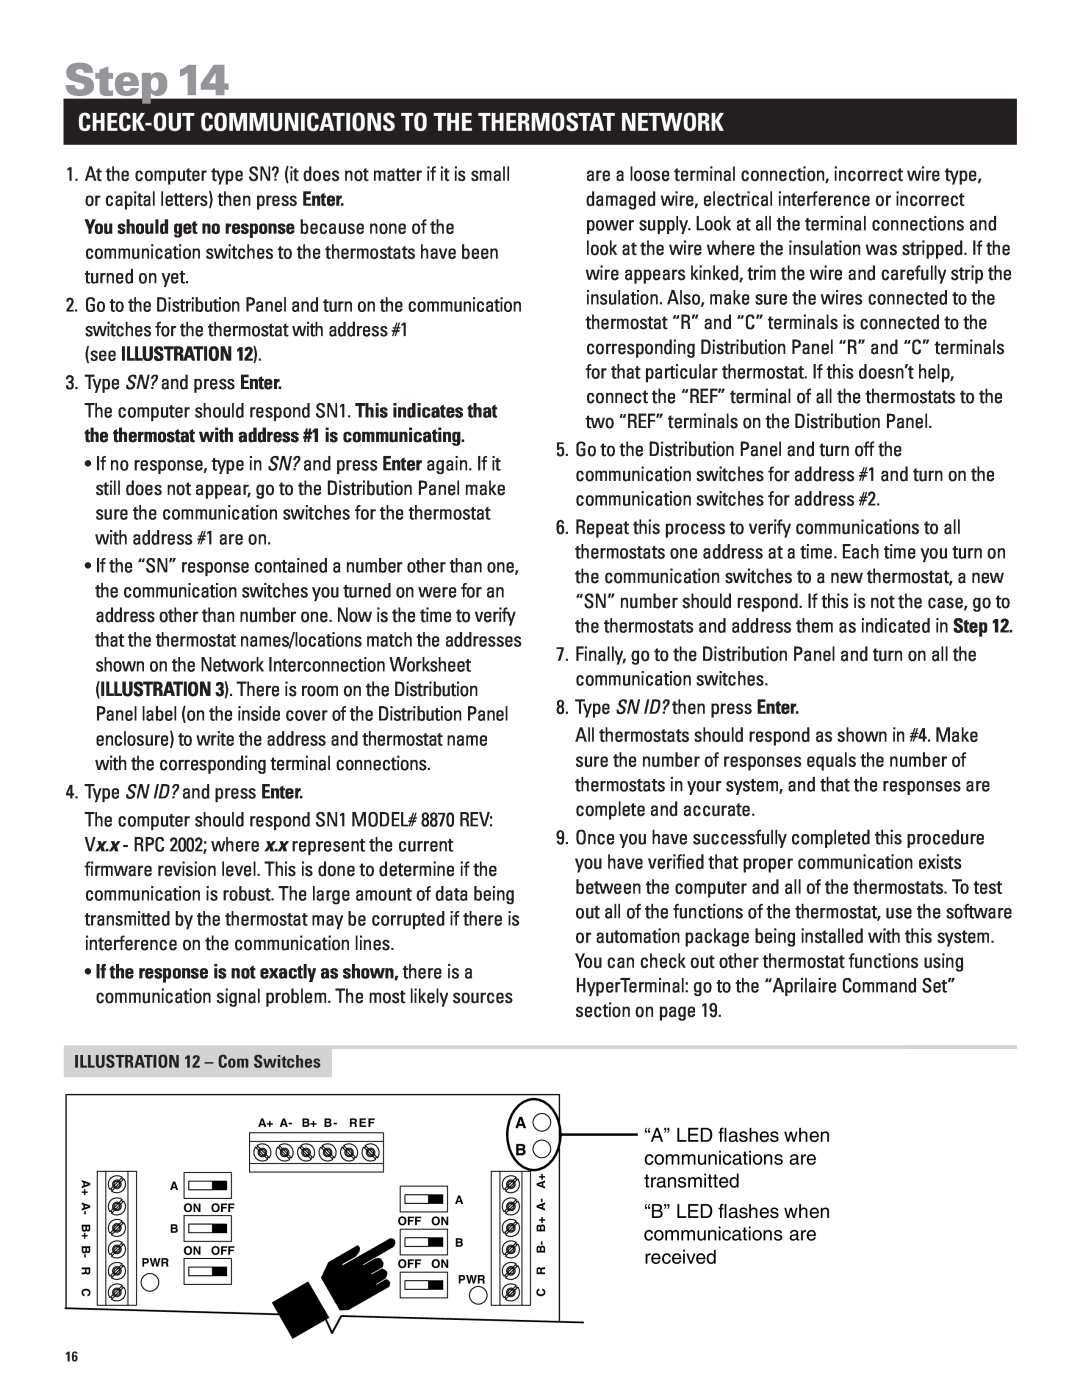 Echo 8870 installation manual Check-Out Communications To The Thermostat Network, Step, see ILLUSTRATION 